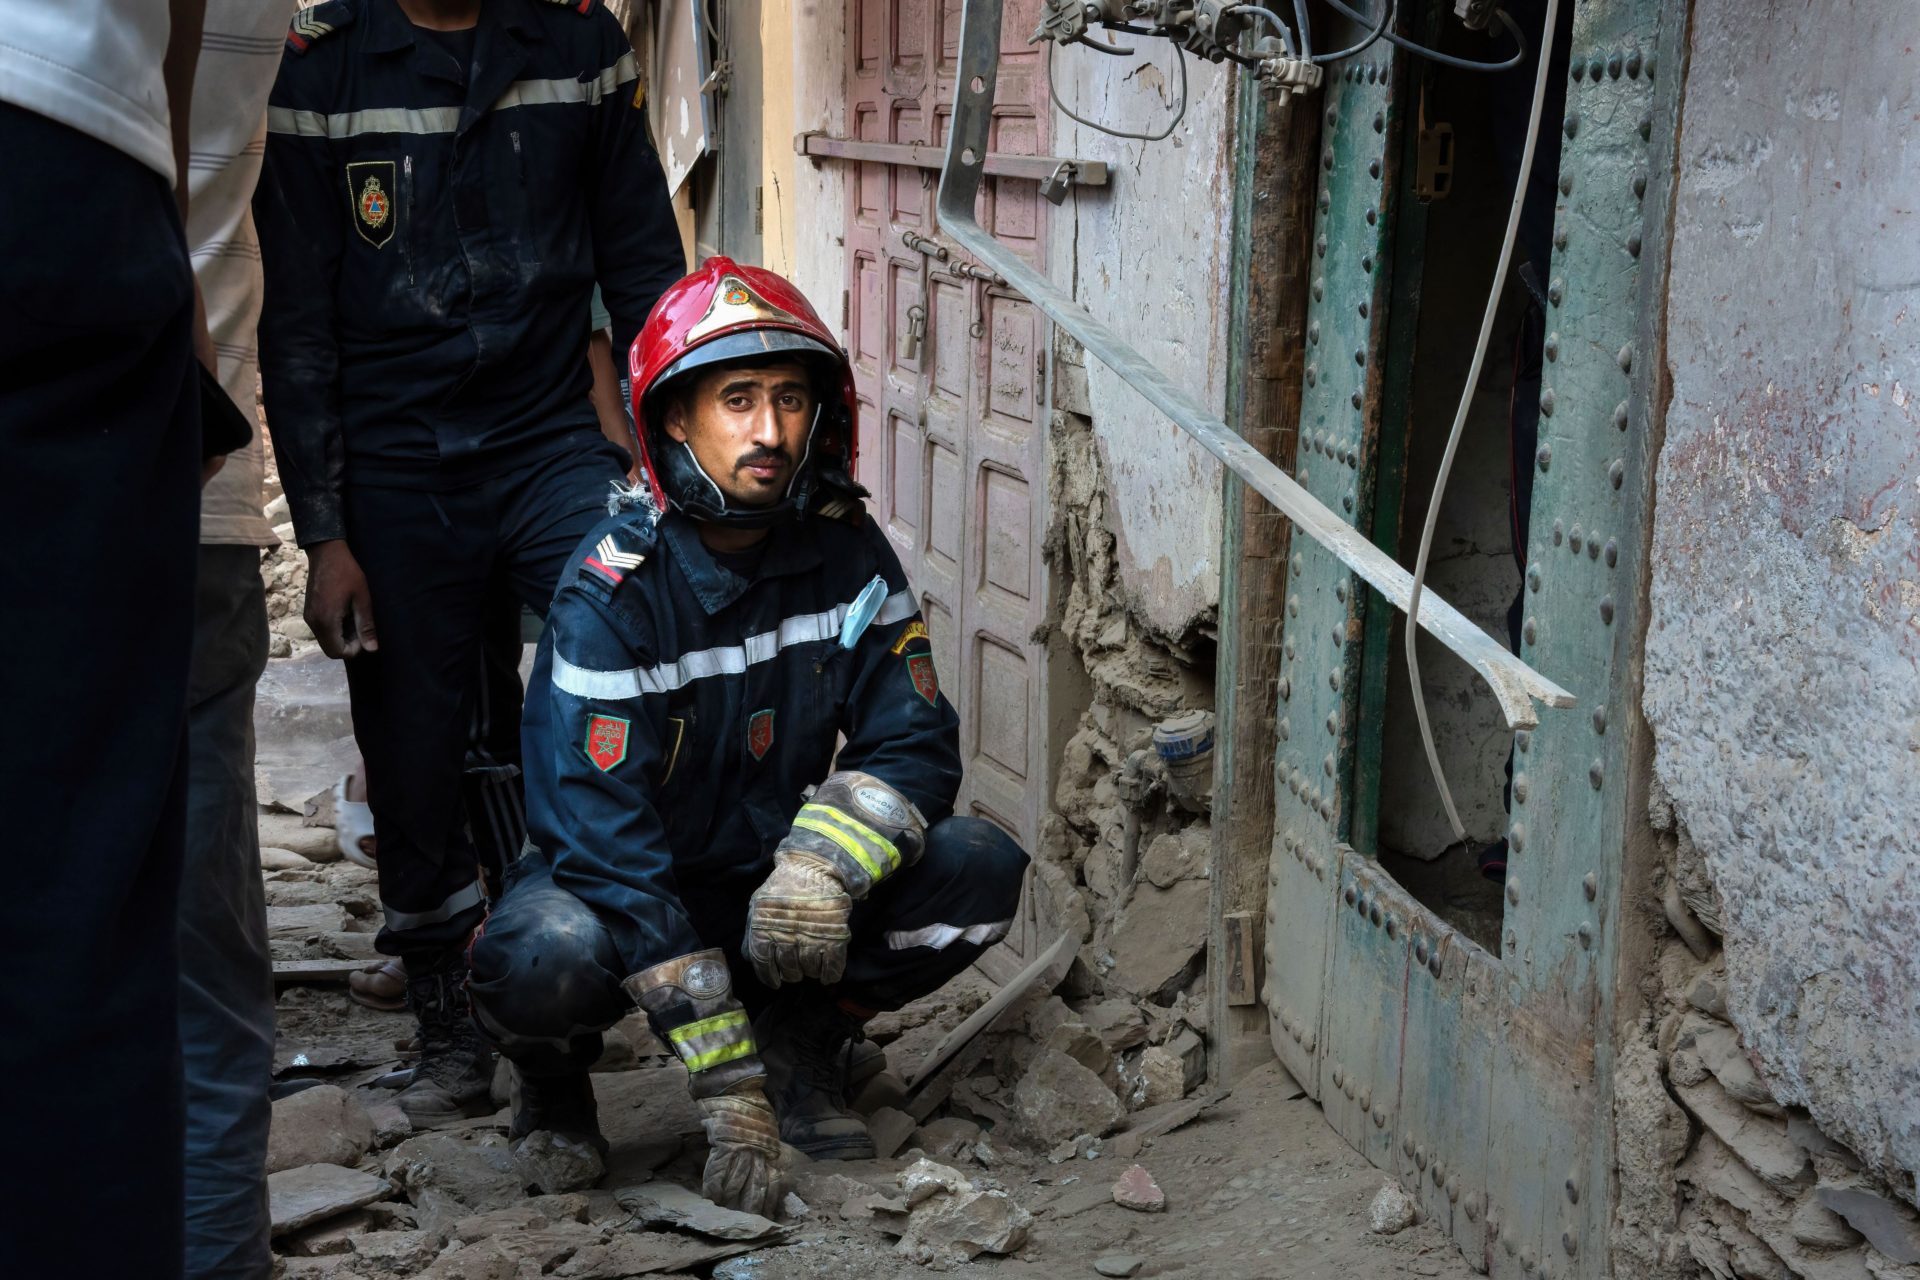 A fireman rests outside a collapsed house where they were searching for bodies under the rubble in the city of Amizmiz, Morocco following the earthquake.